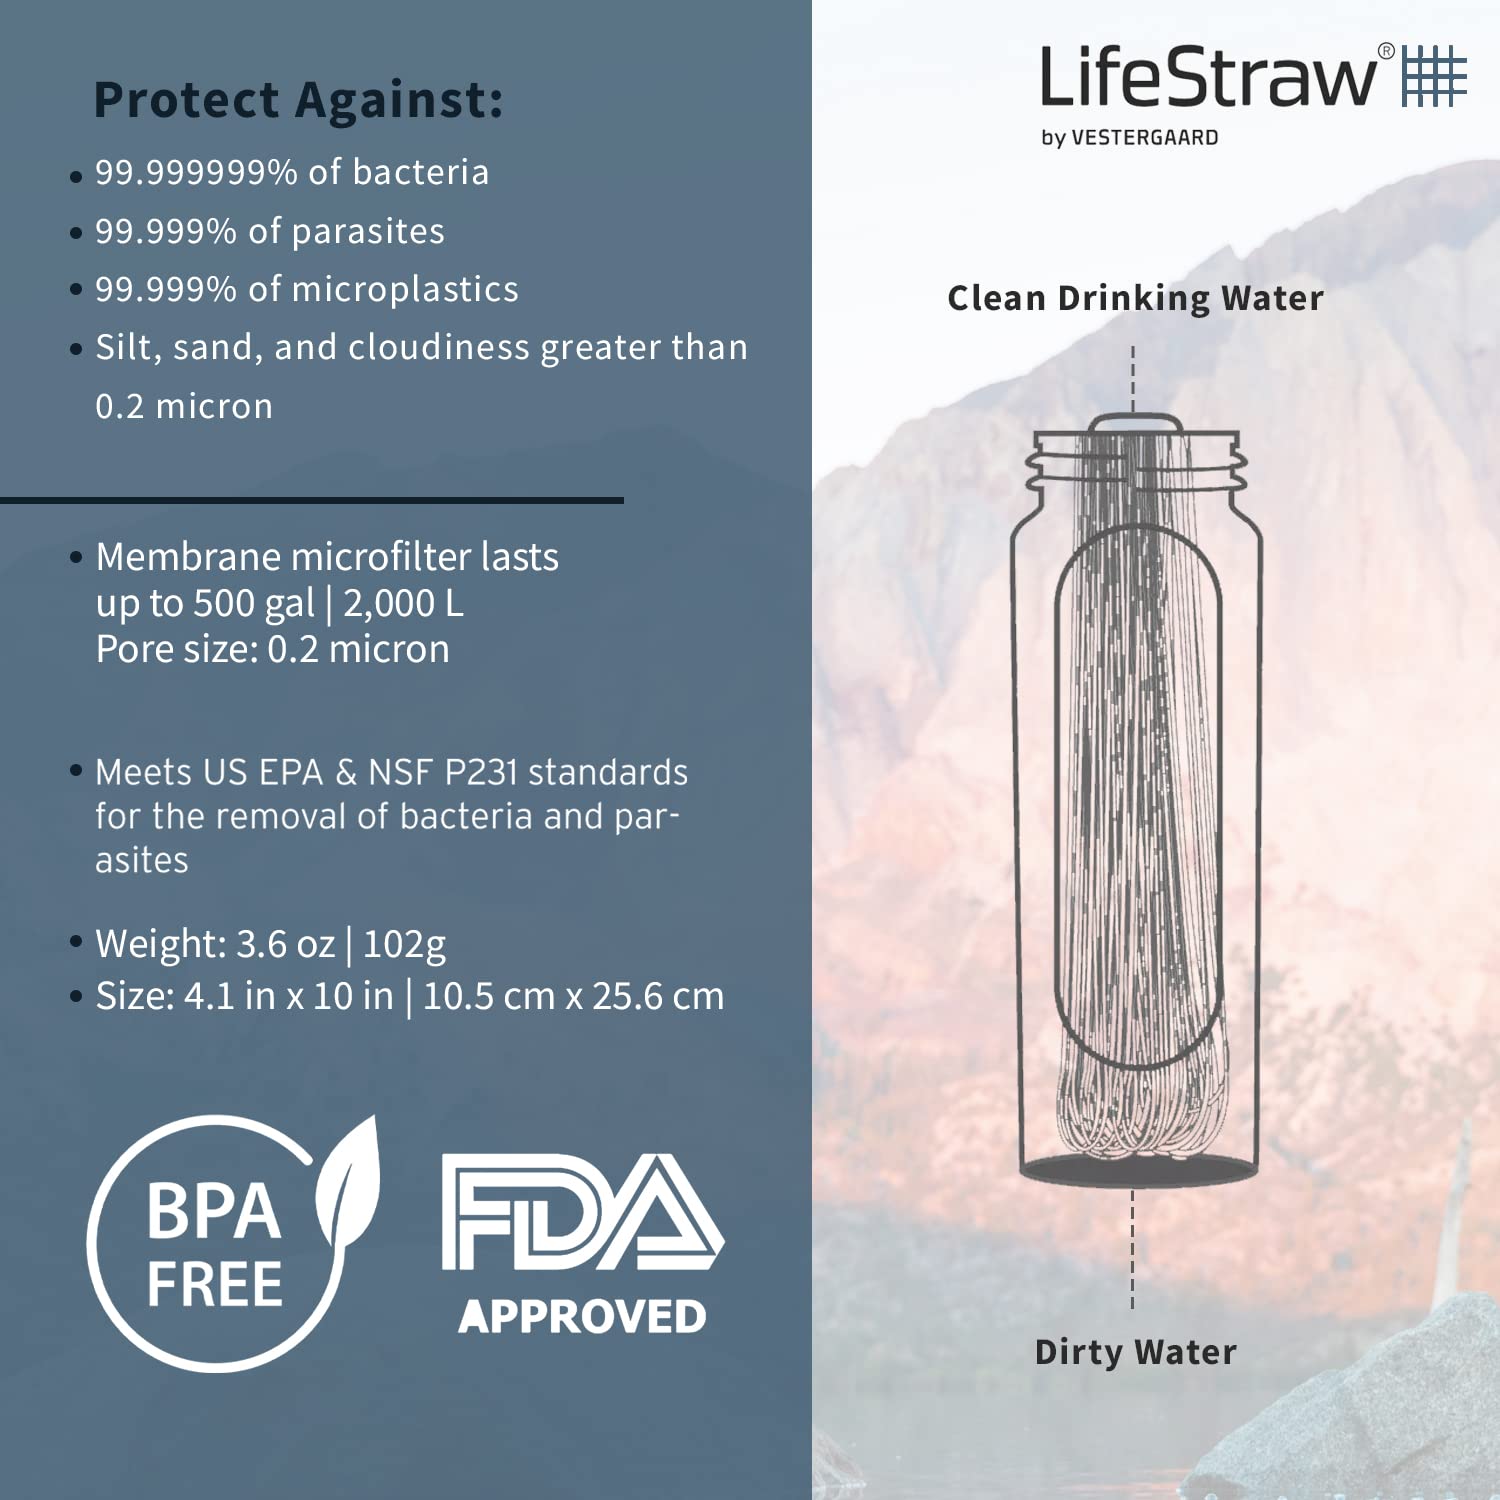 LifeStraw Peak Series - Collapsible Water Filter System – for Trail Running, Through Hiking, Camping, RVing, Travel, Cycling, and Fishing